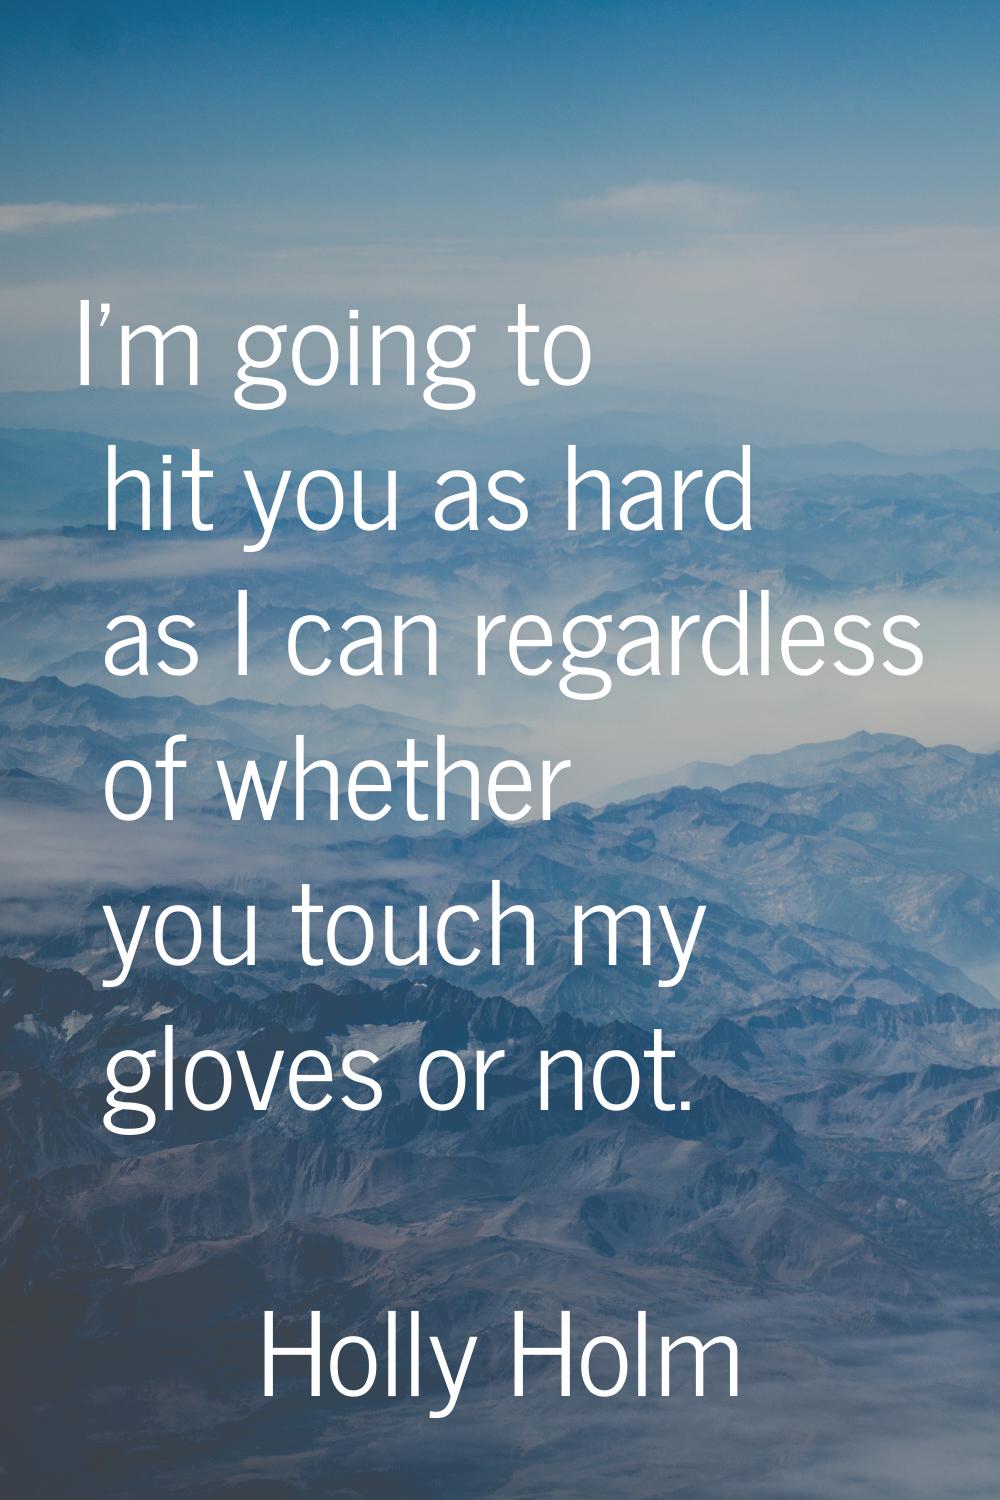 I'm going to hit you as hard as I can regardless of whether you touch my gloves or not.